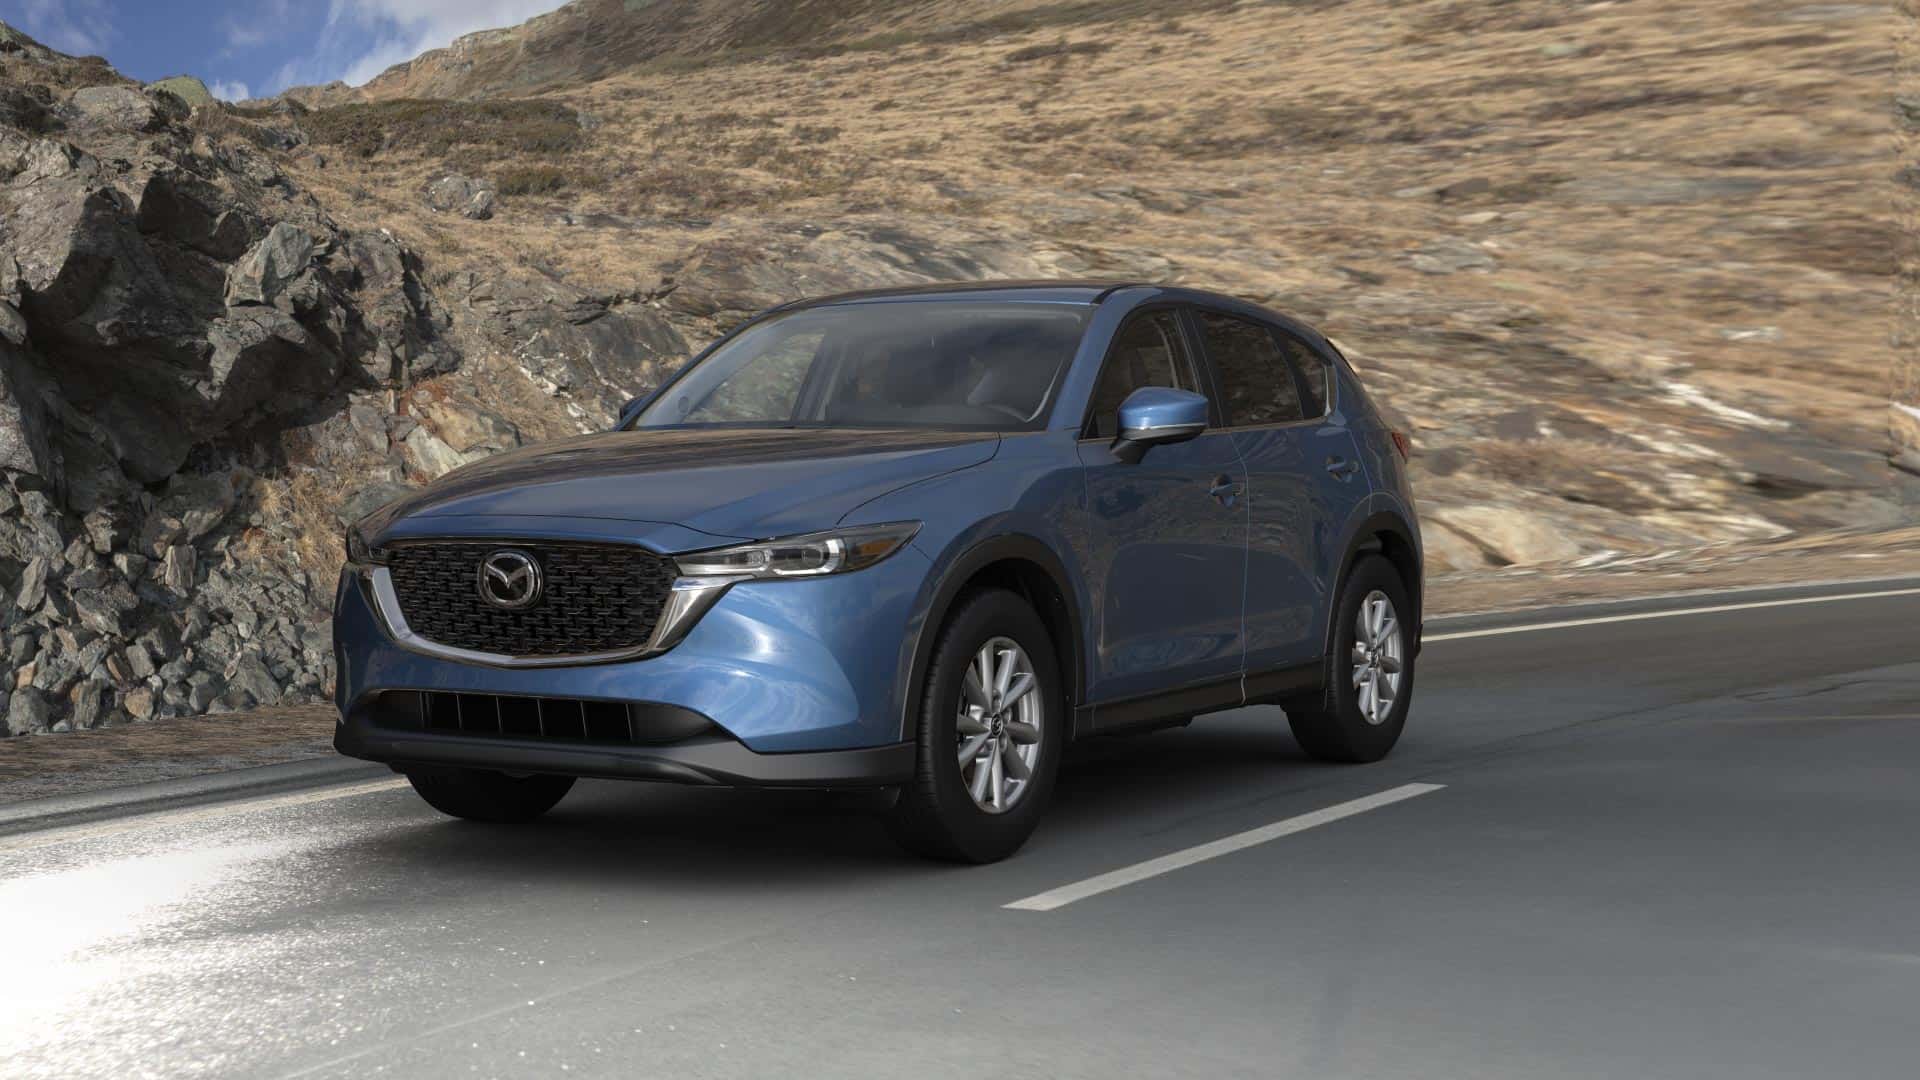 2023 Mazda CX-5 2.5 S Select Eternal Blue Mica | Neil Huffman Mazda in Louisville KY